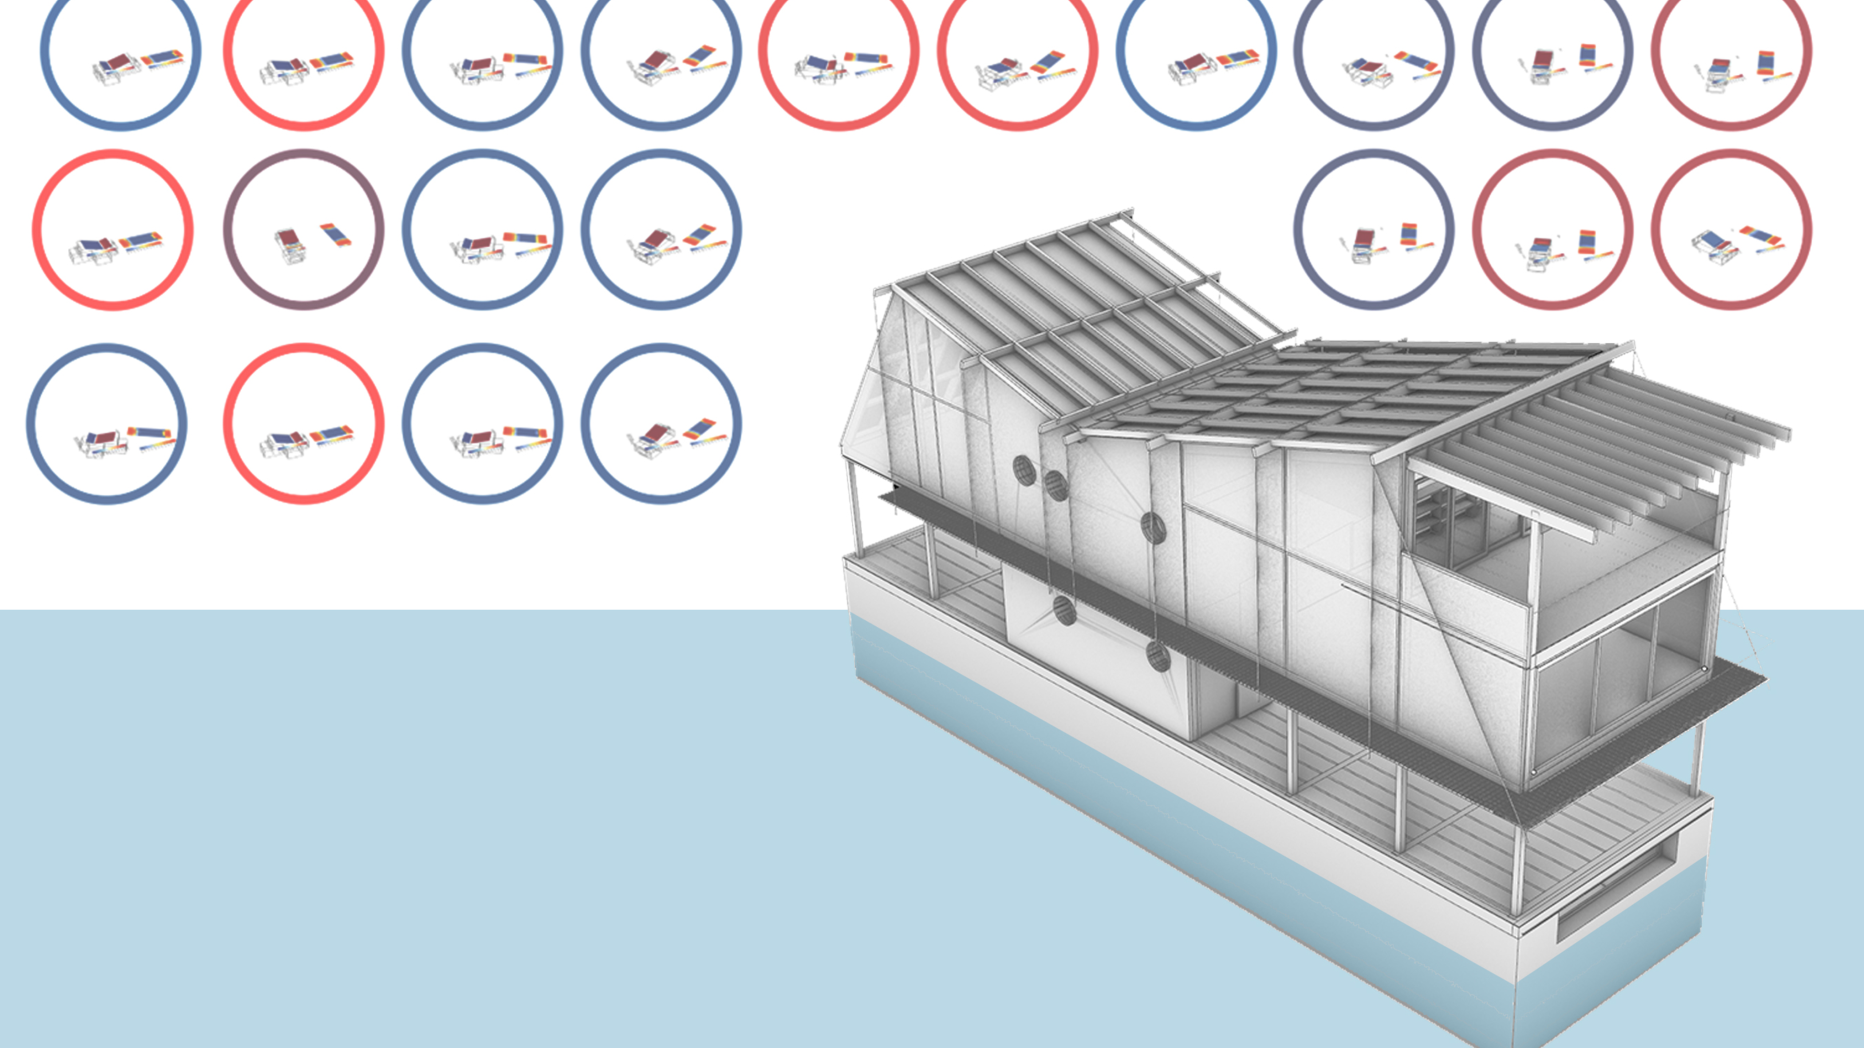 Drawing depicting a floating wood structure on a concret hull with small diagrams of orientation optimization study